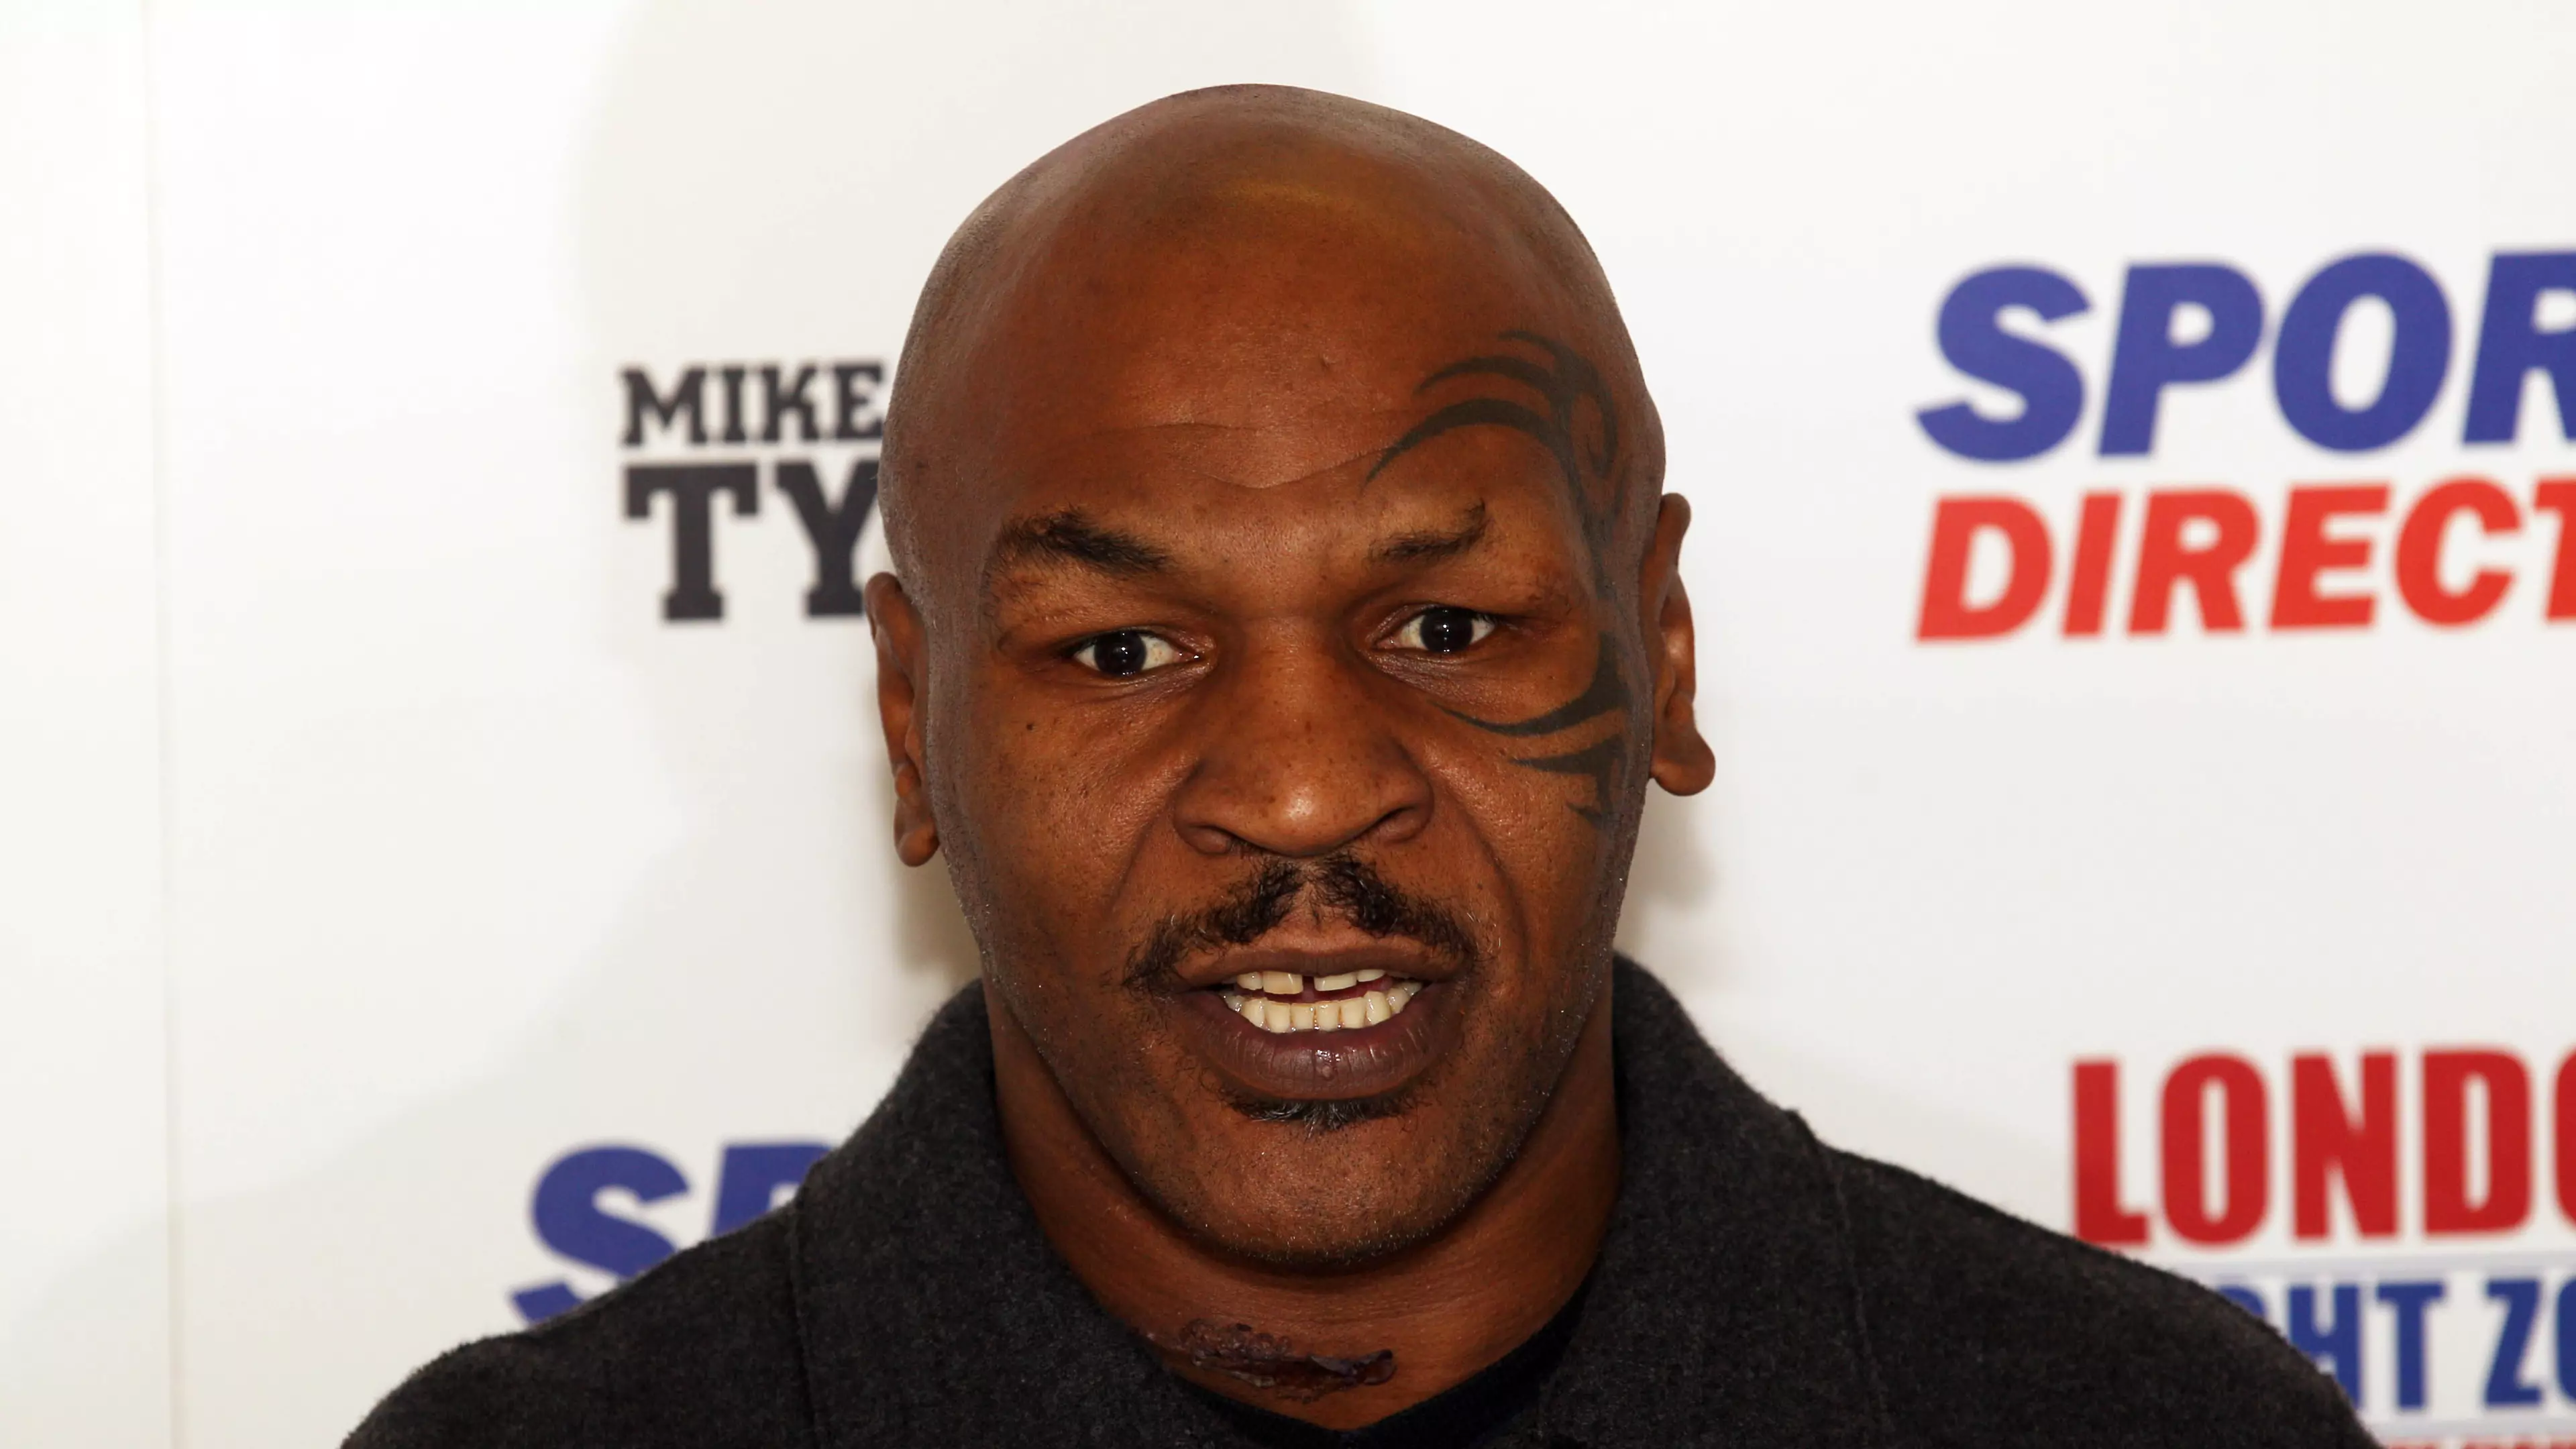 Mike Tyson Wrote To English Gangster Reggie Kray While He Was In Prison